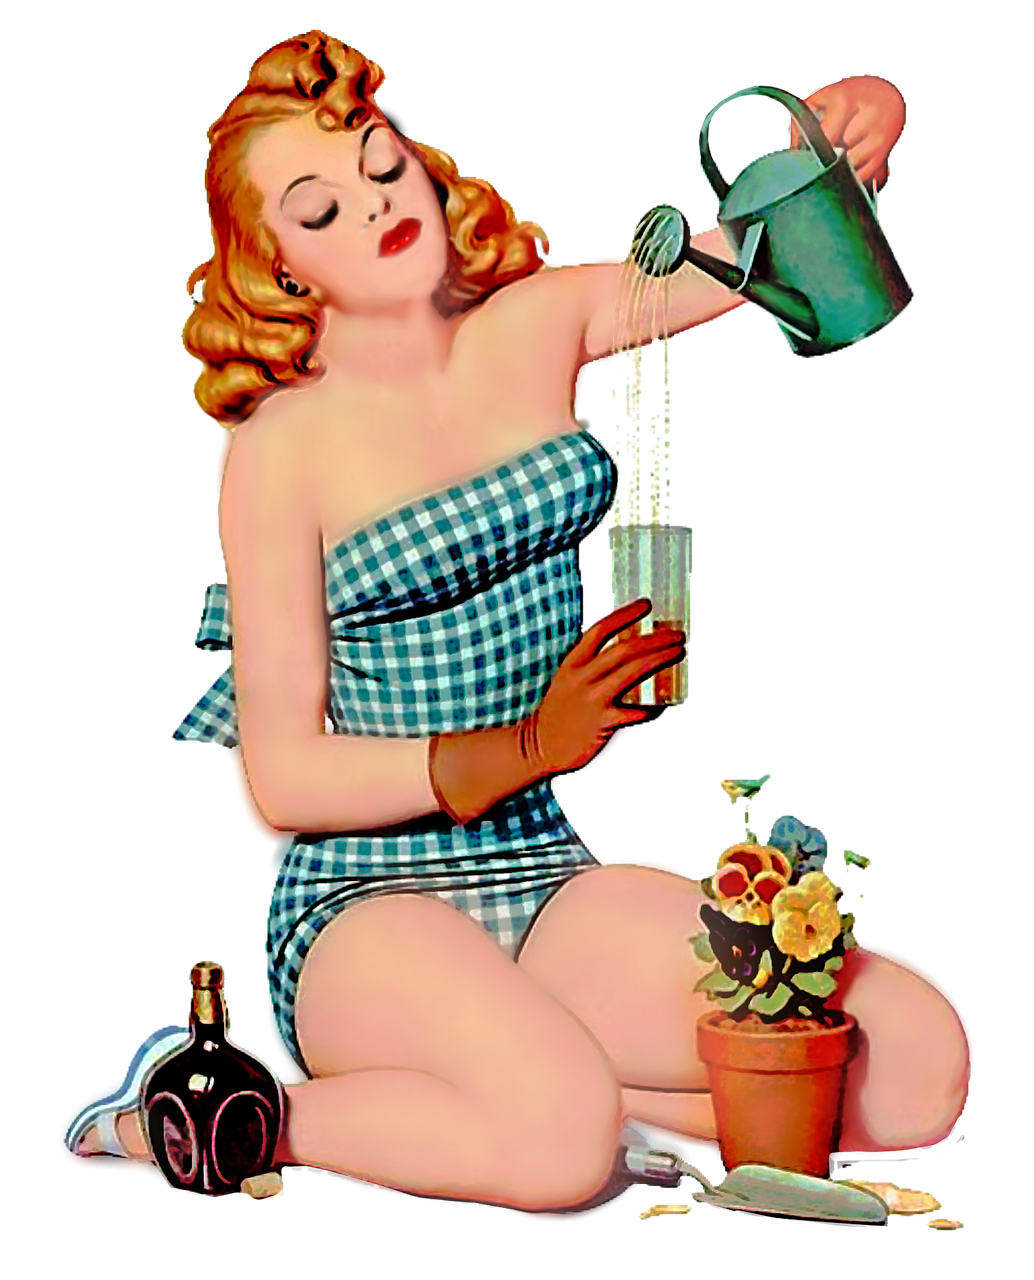 a woman sitting on the ground next to a potted plant, digital art, by Gil Elvgren, pop art, watering can, upper body shot, ((oversaturated)), full body potrait holding bottle